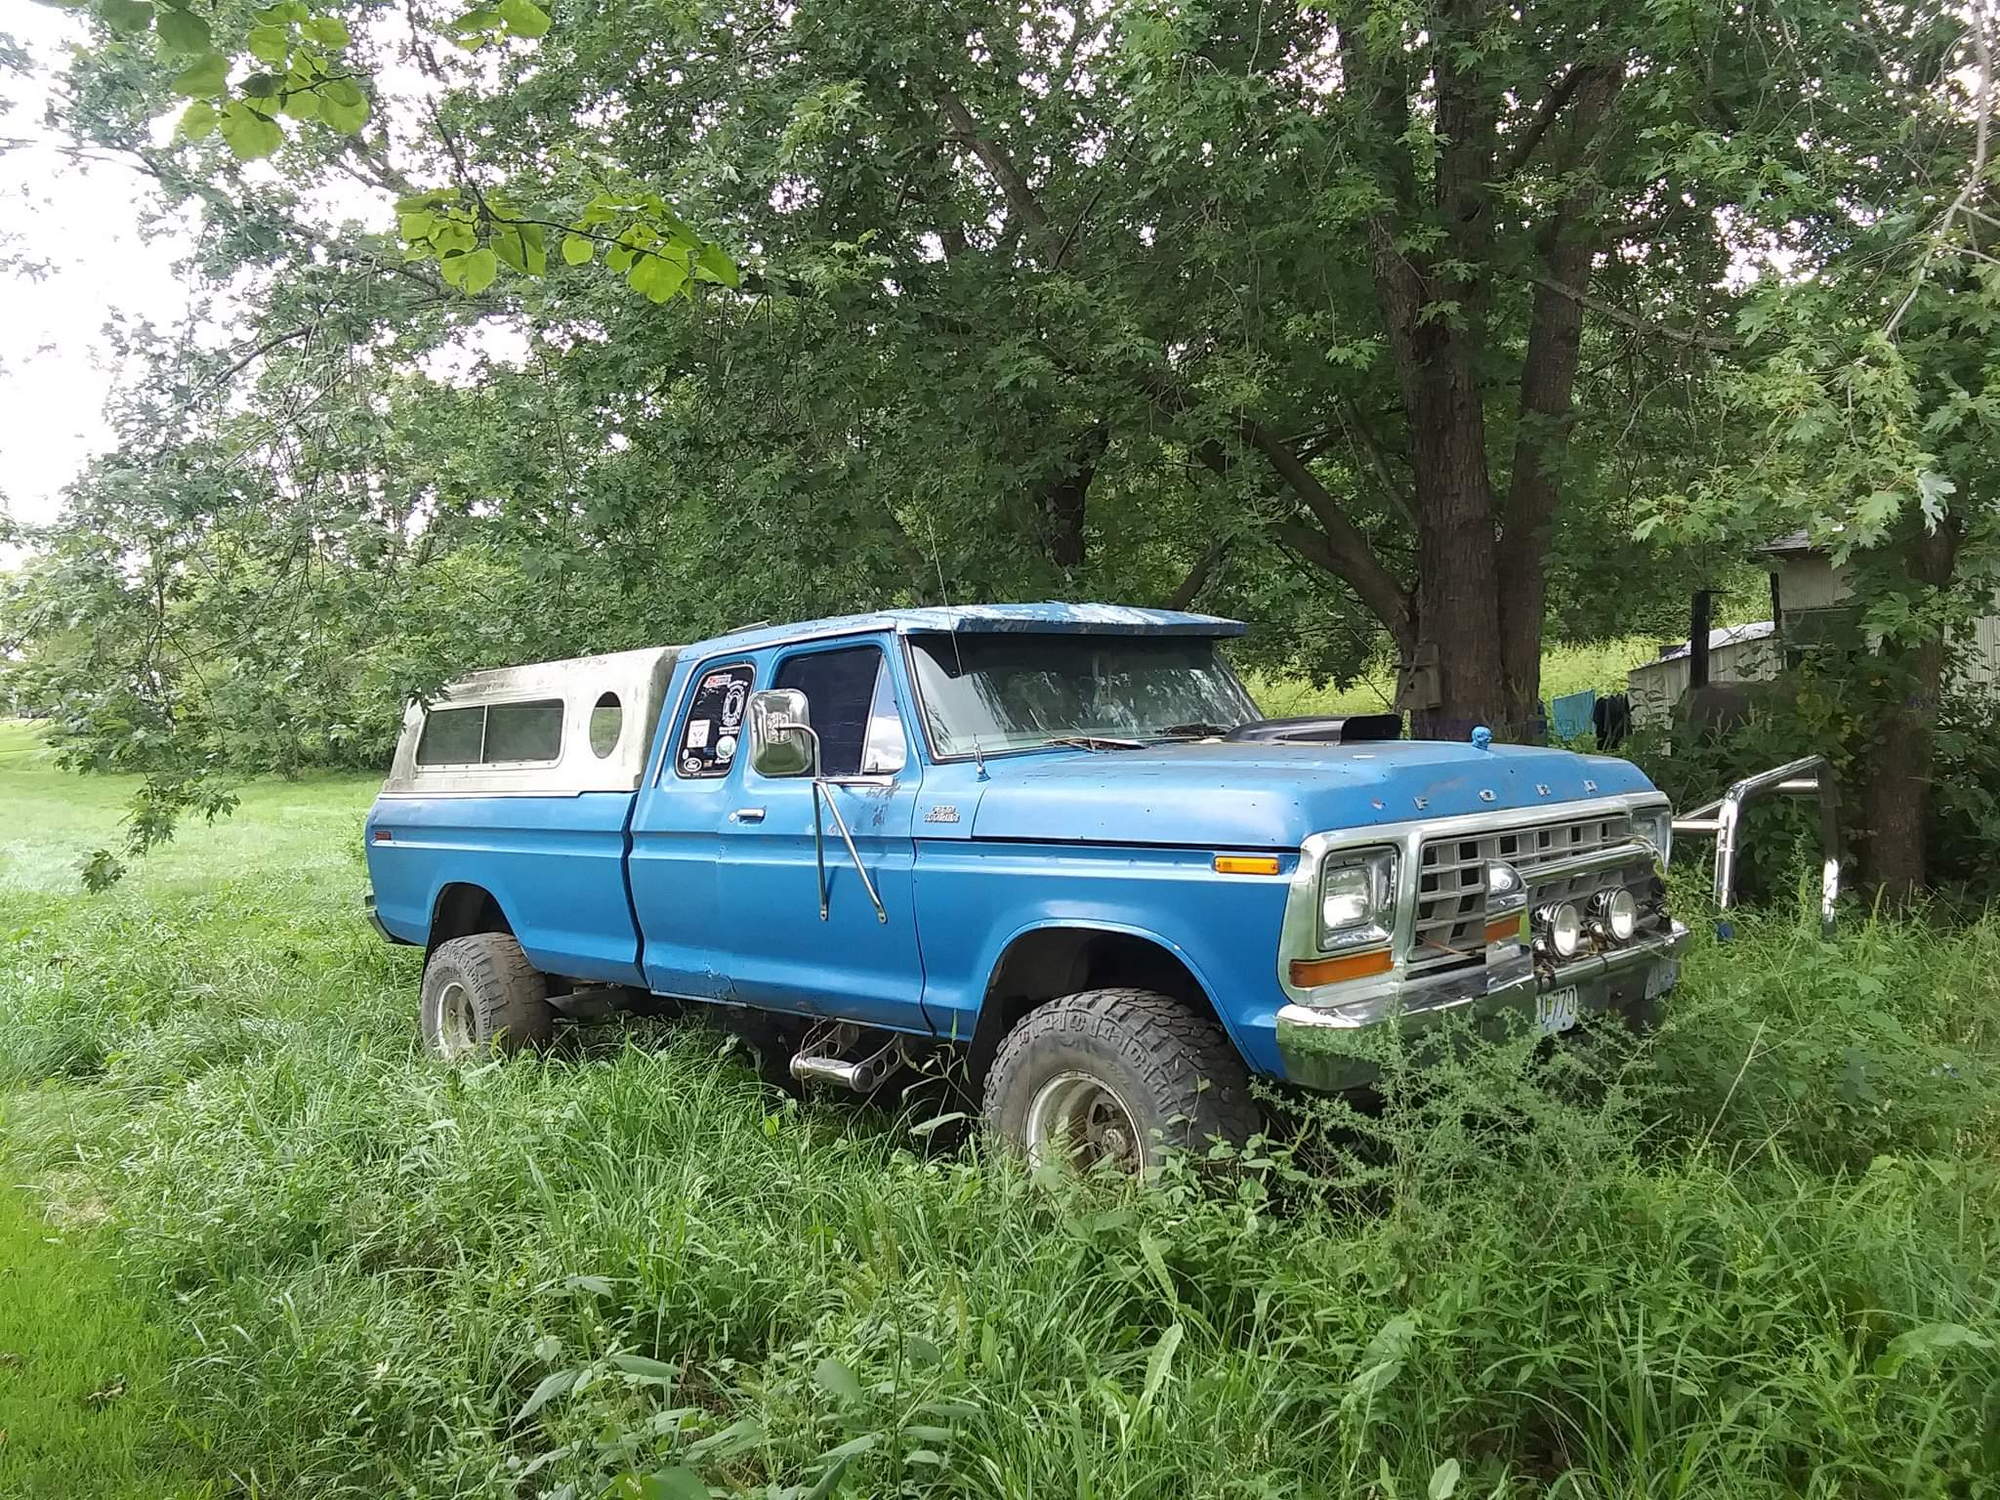 Craigslist find of the week! - Page 249 - Ford Truck ...